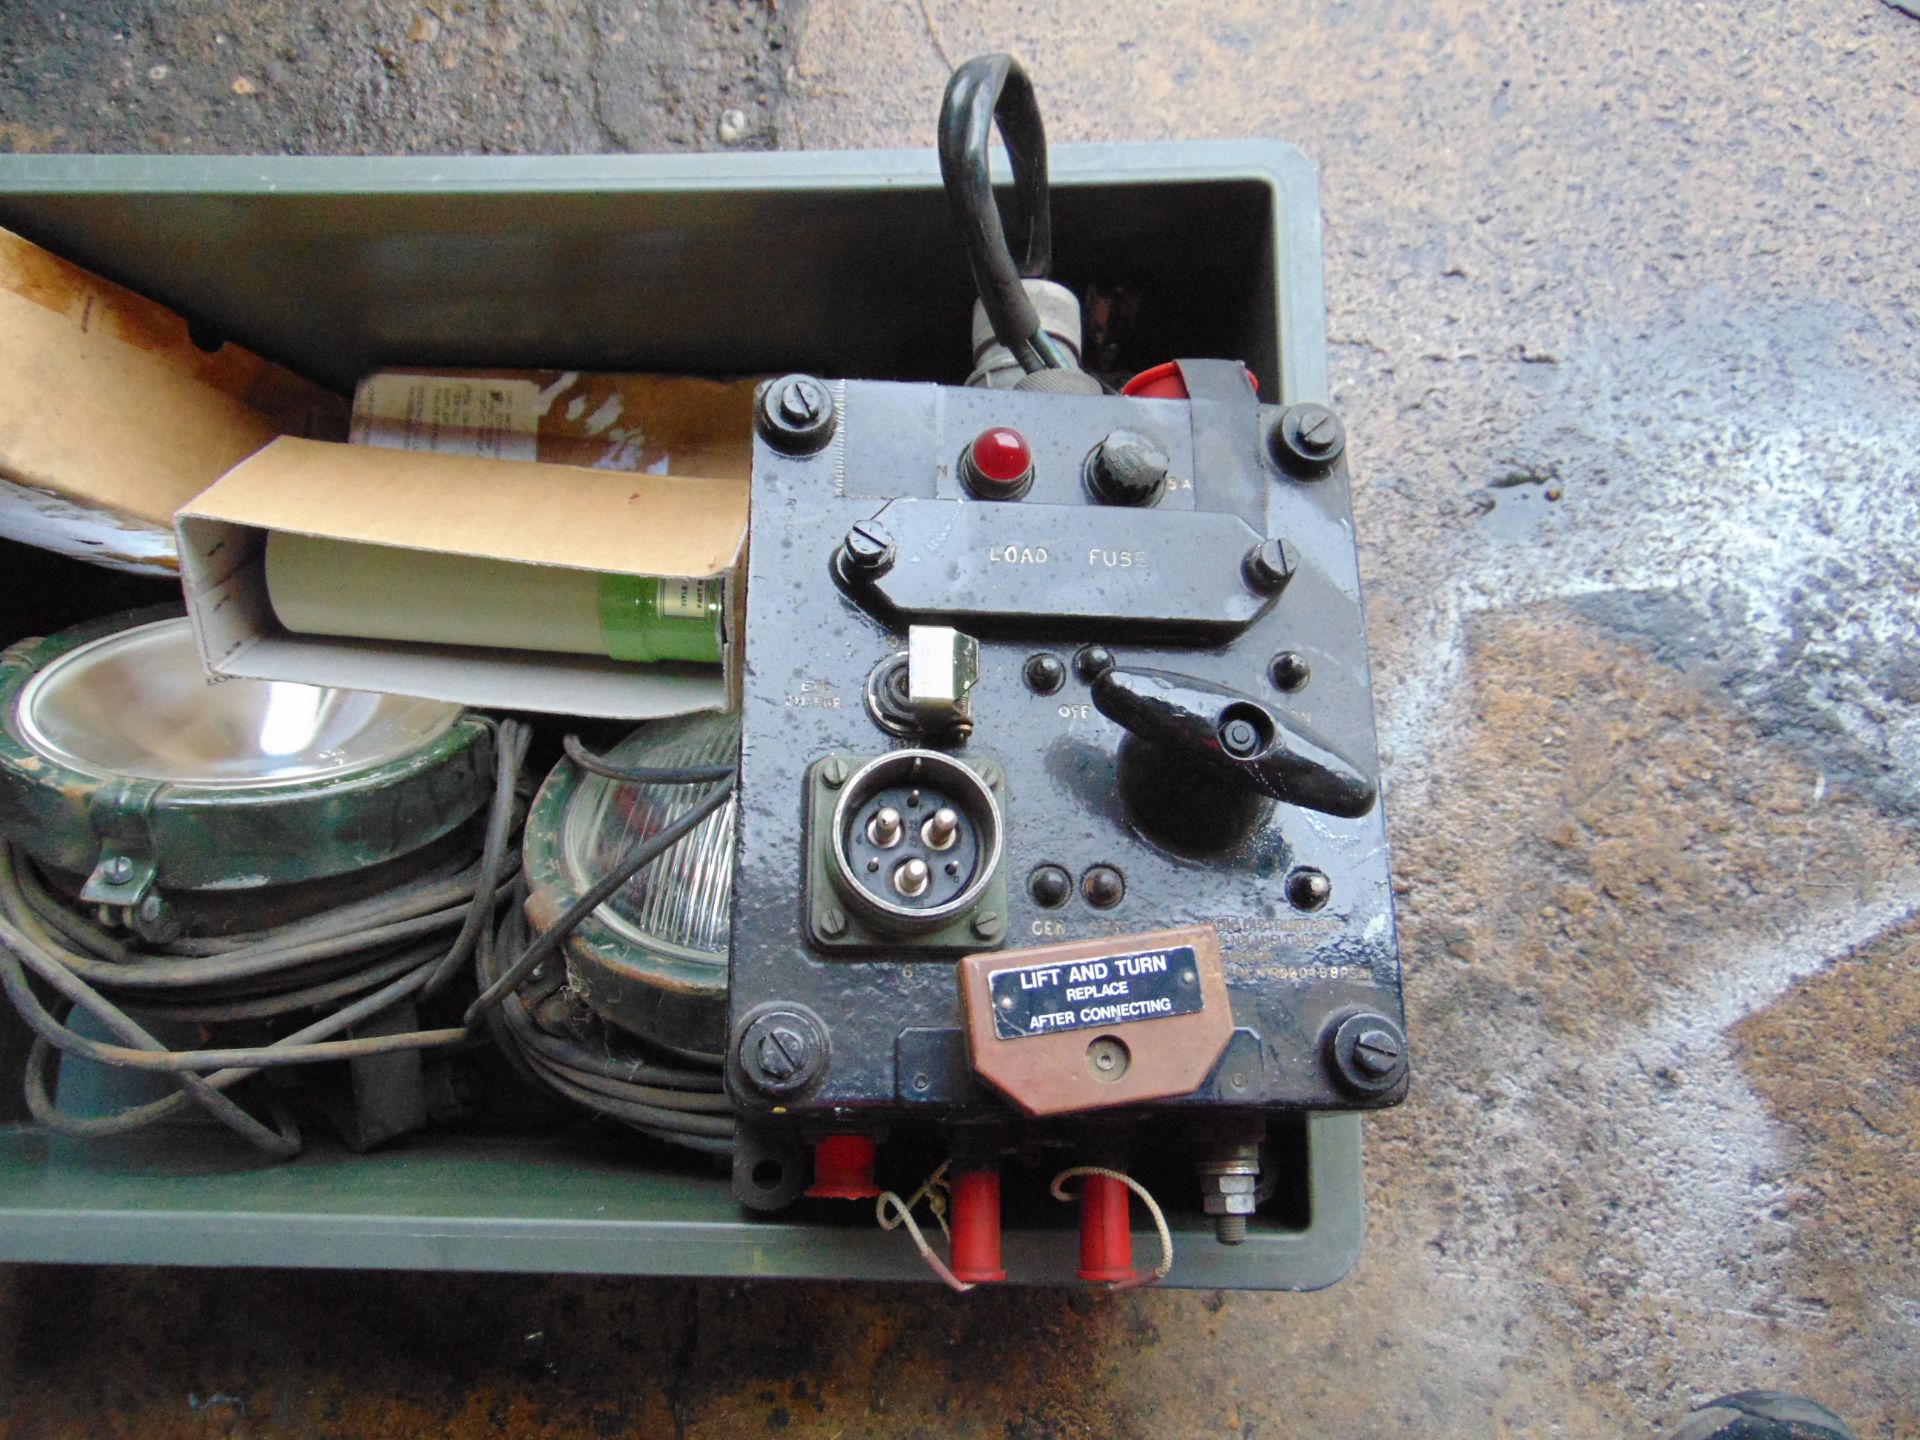 FV 432 Electrical Box, Wiper Motors, Spot Lamps, Smoke Discharge Testers - Image 5 of 6